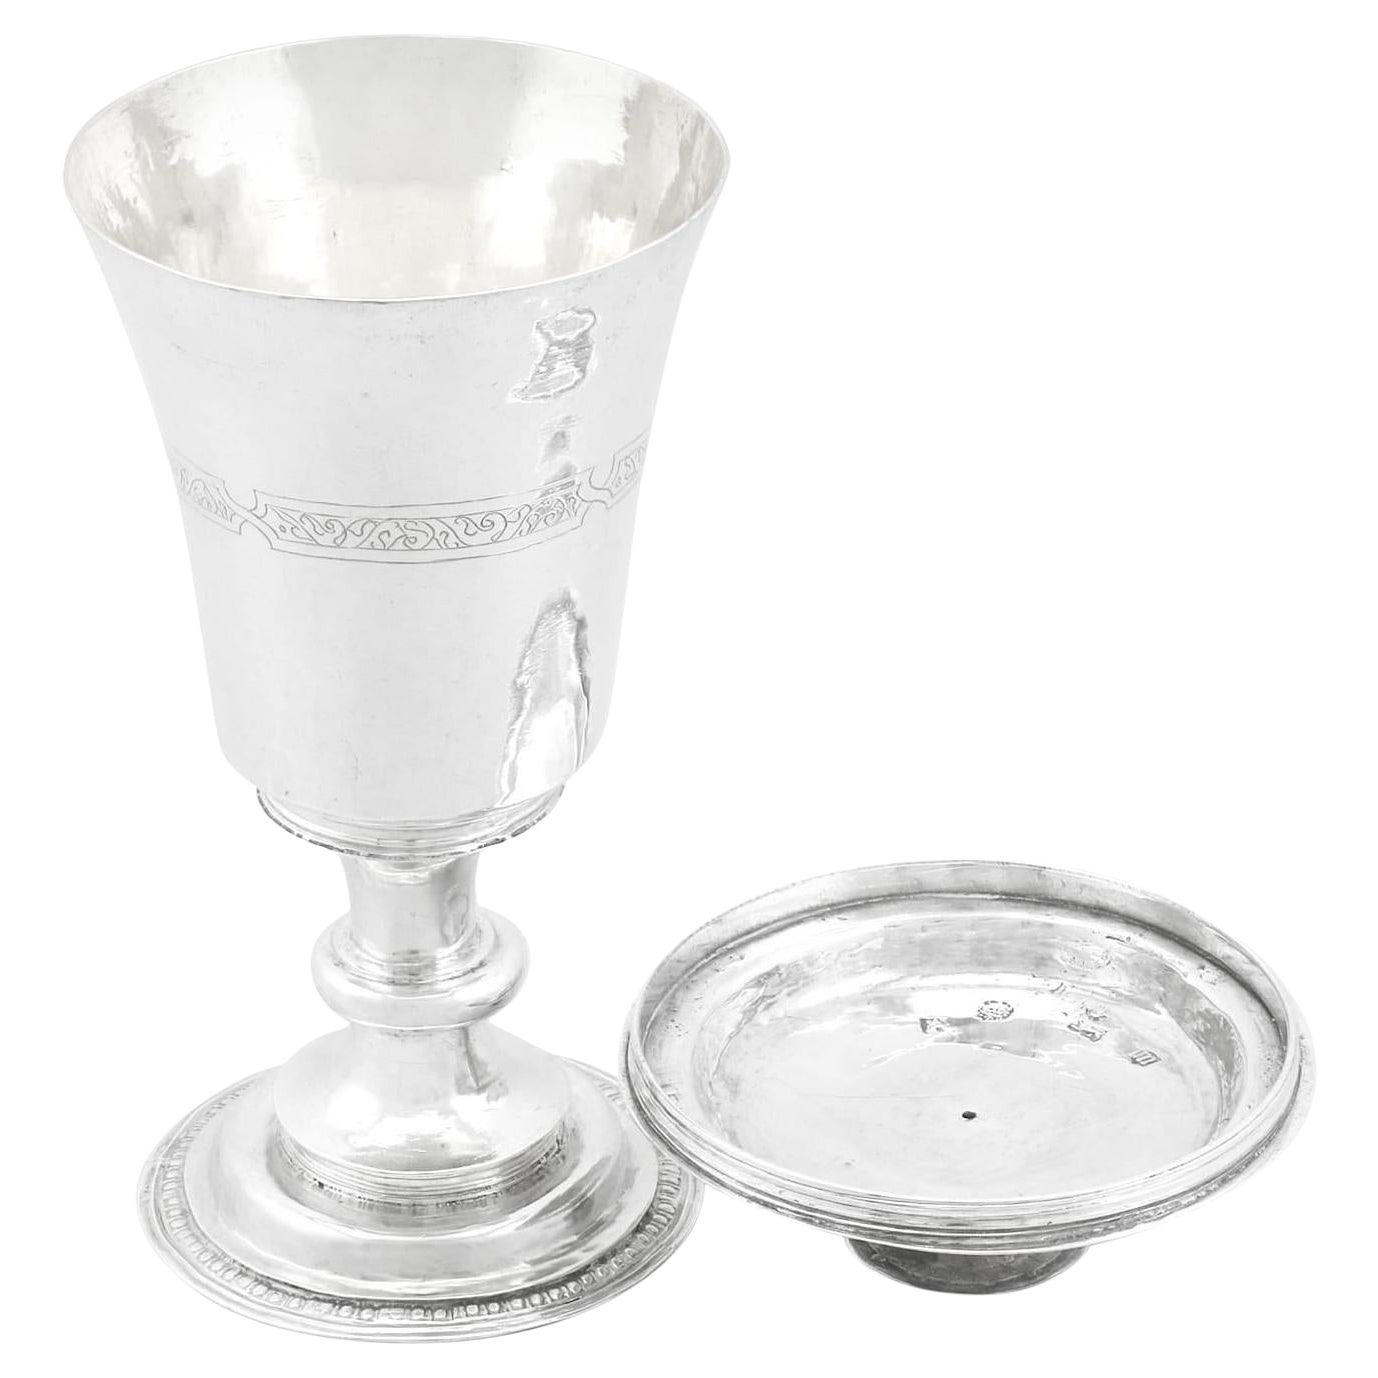 1500s Elizabethan Sterling Silver Communion Chalice and Paten